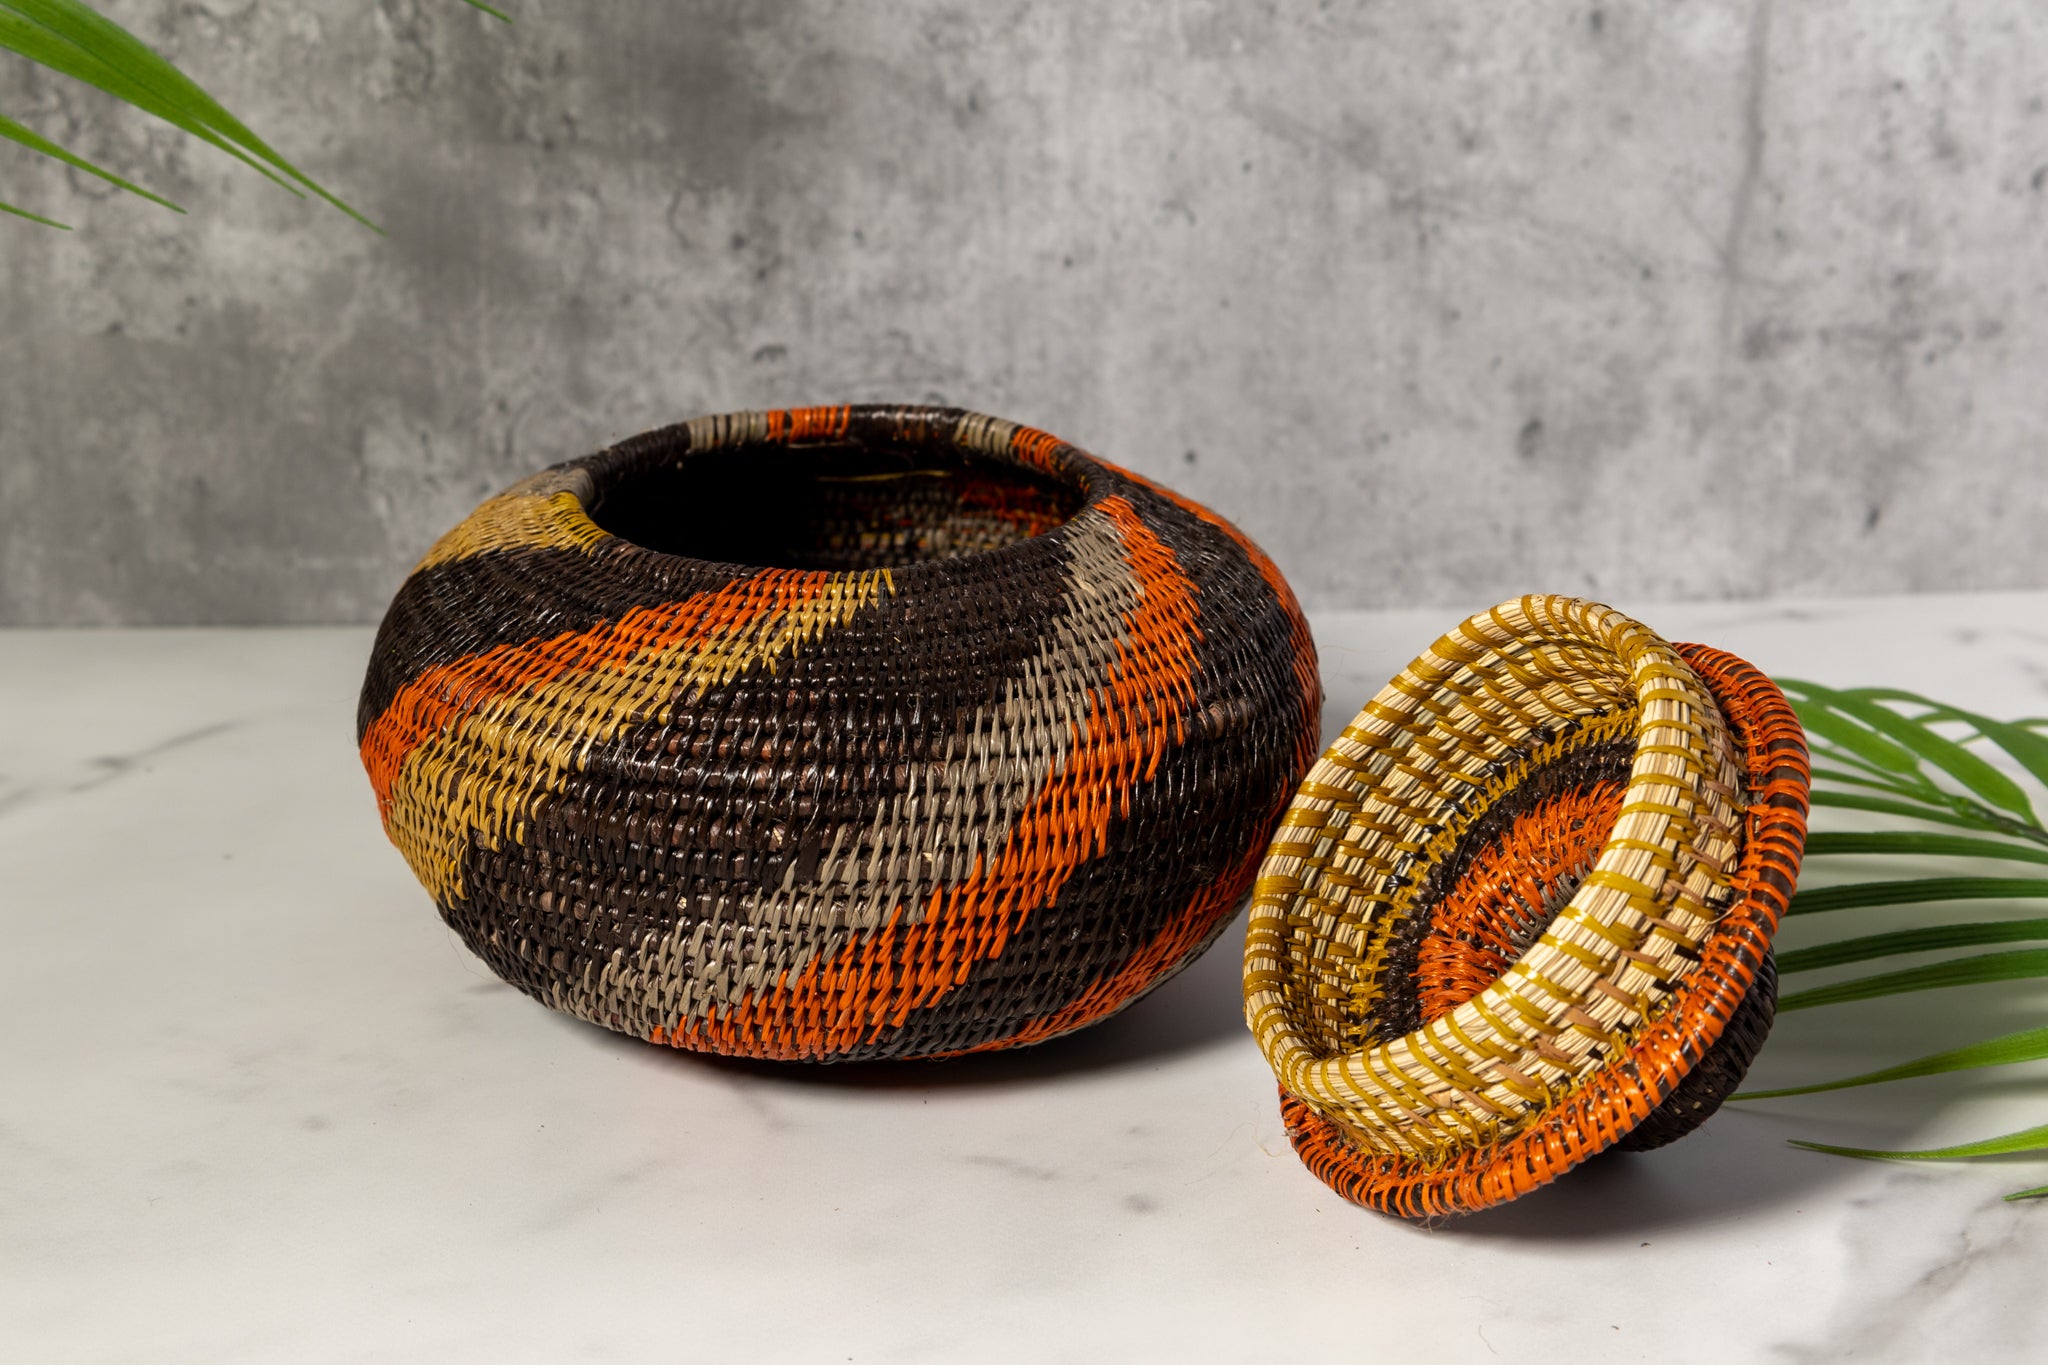 Black orange And Gray Woven Basket With Top